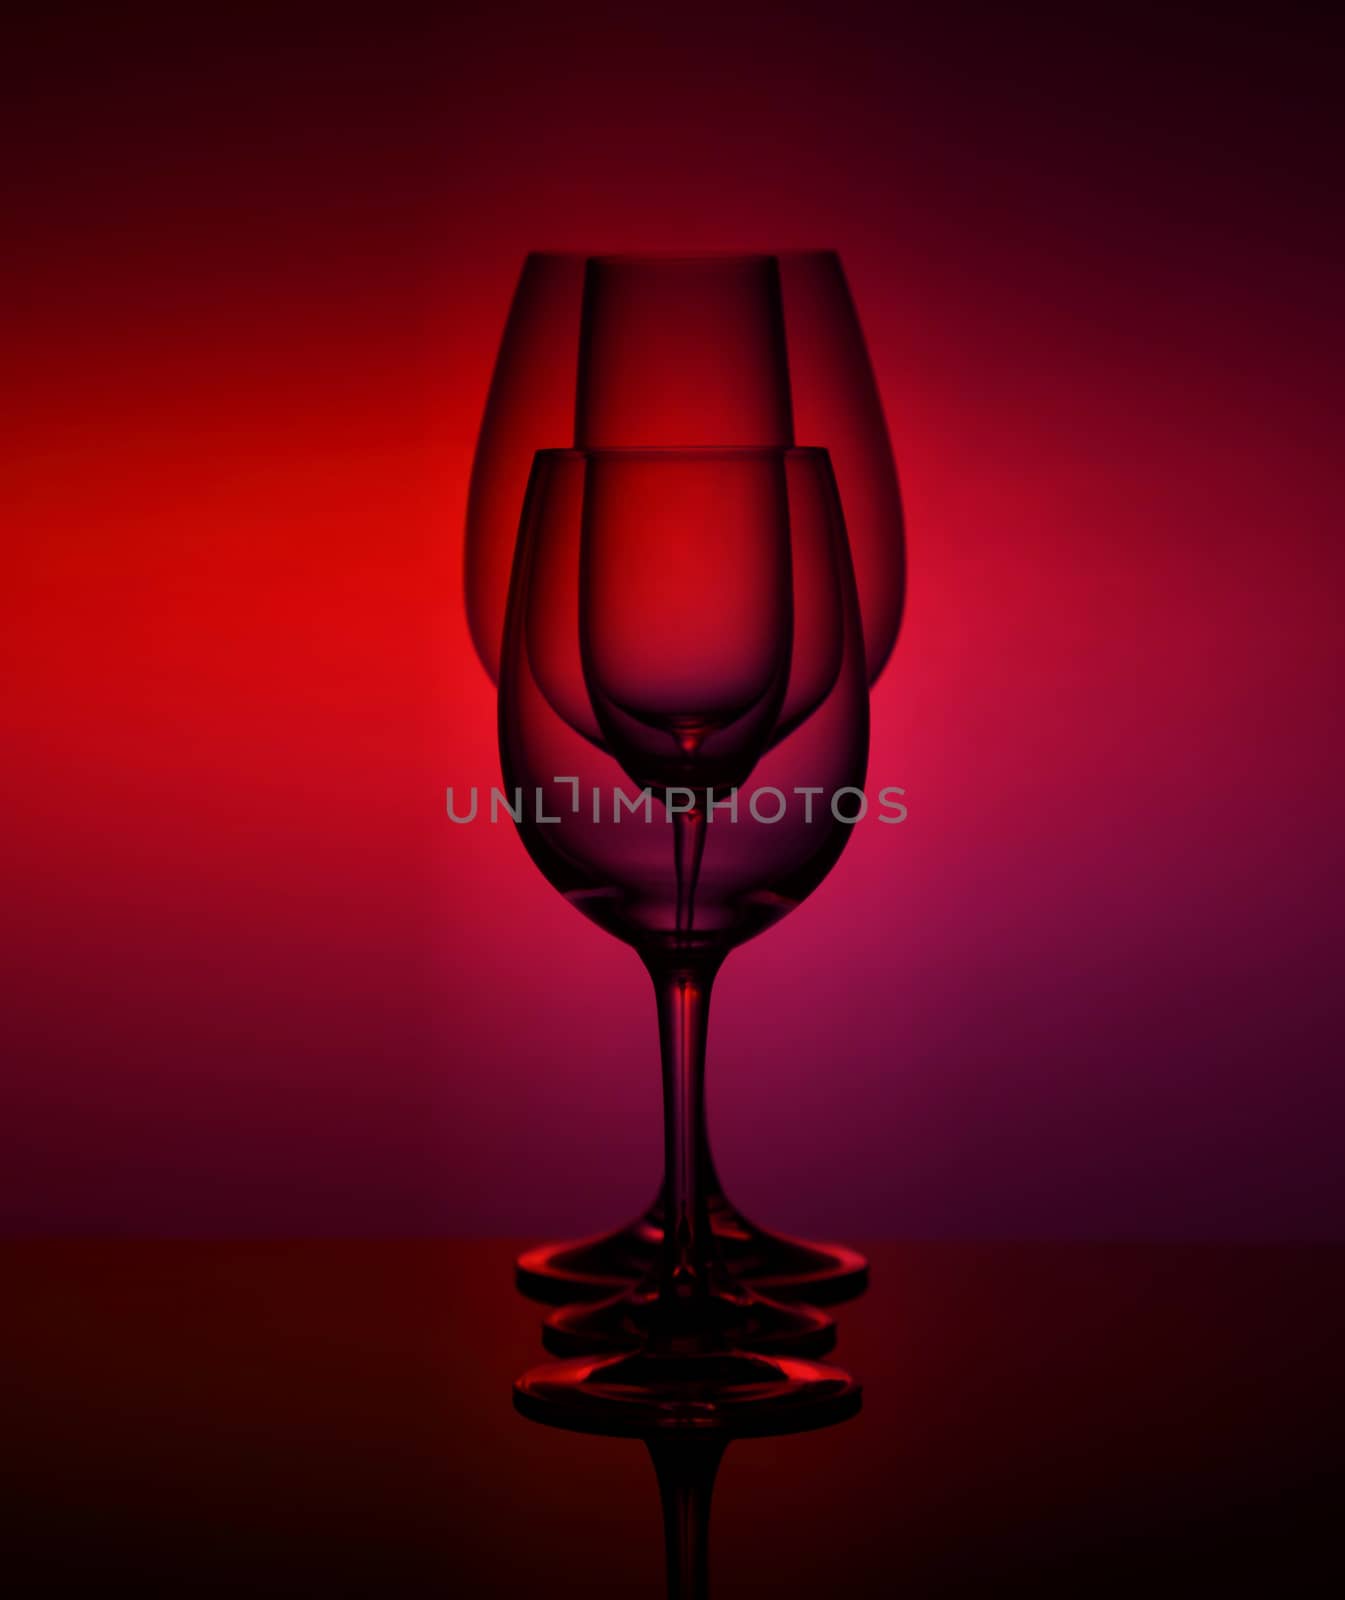 close-Up view Of various empty Glasses Against Colored Background.